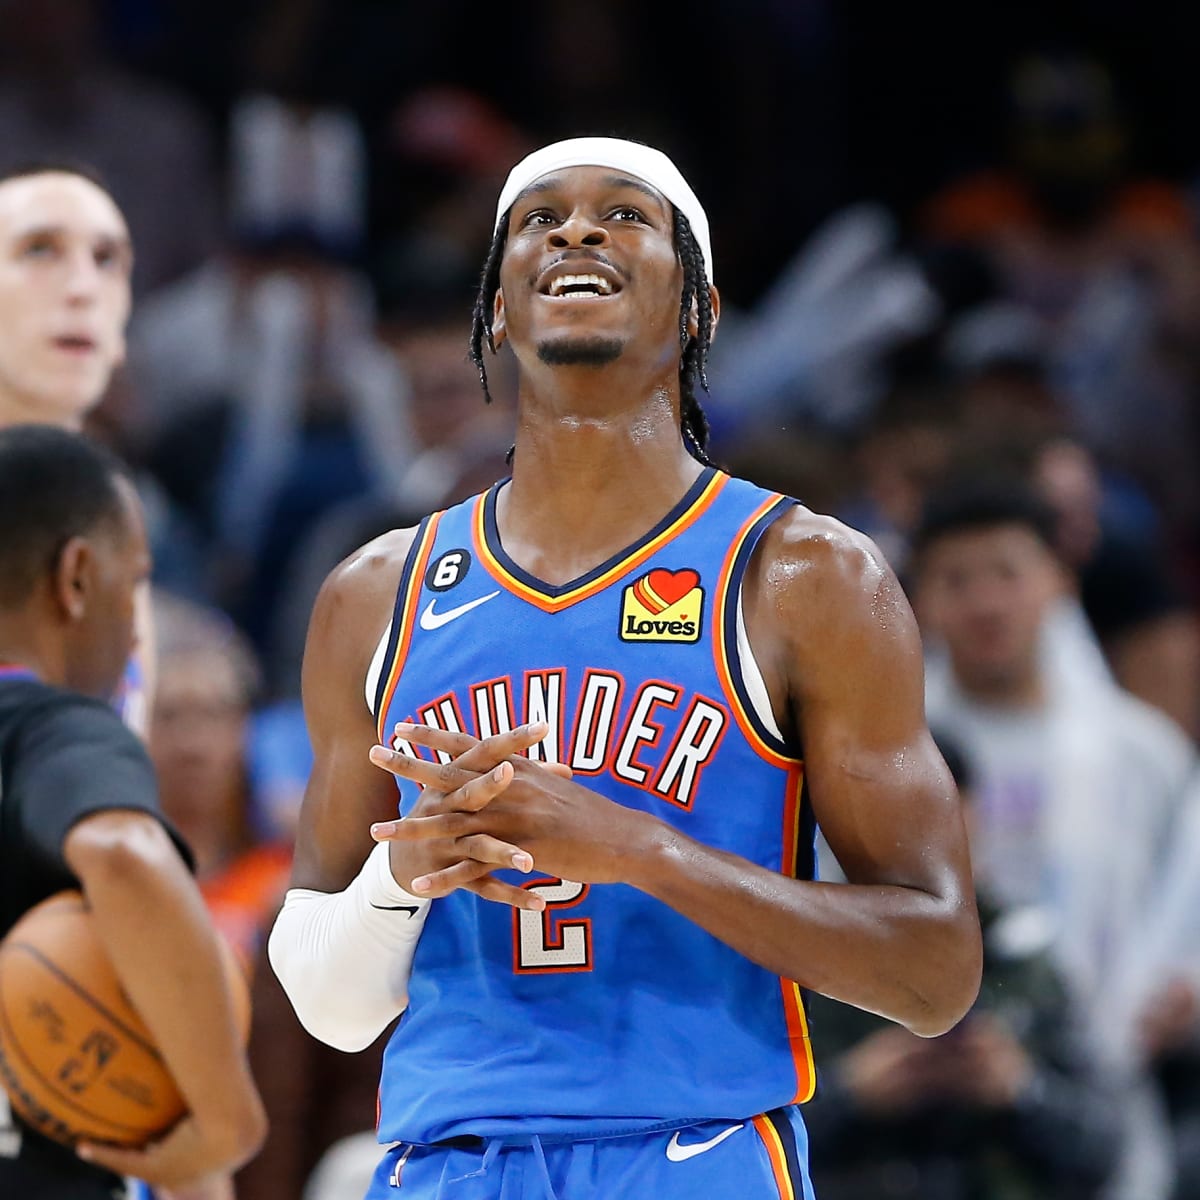 Covers on X: What's the most bet on NBA prop tonight? ➡️ Shai Gilgeous- Alexander o30.5 points (-125)  / X